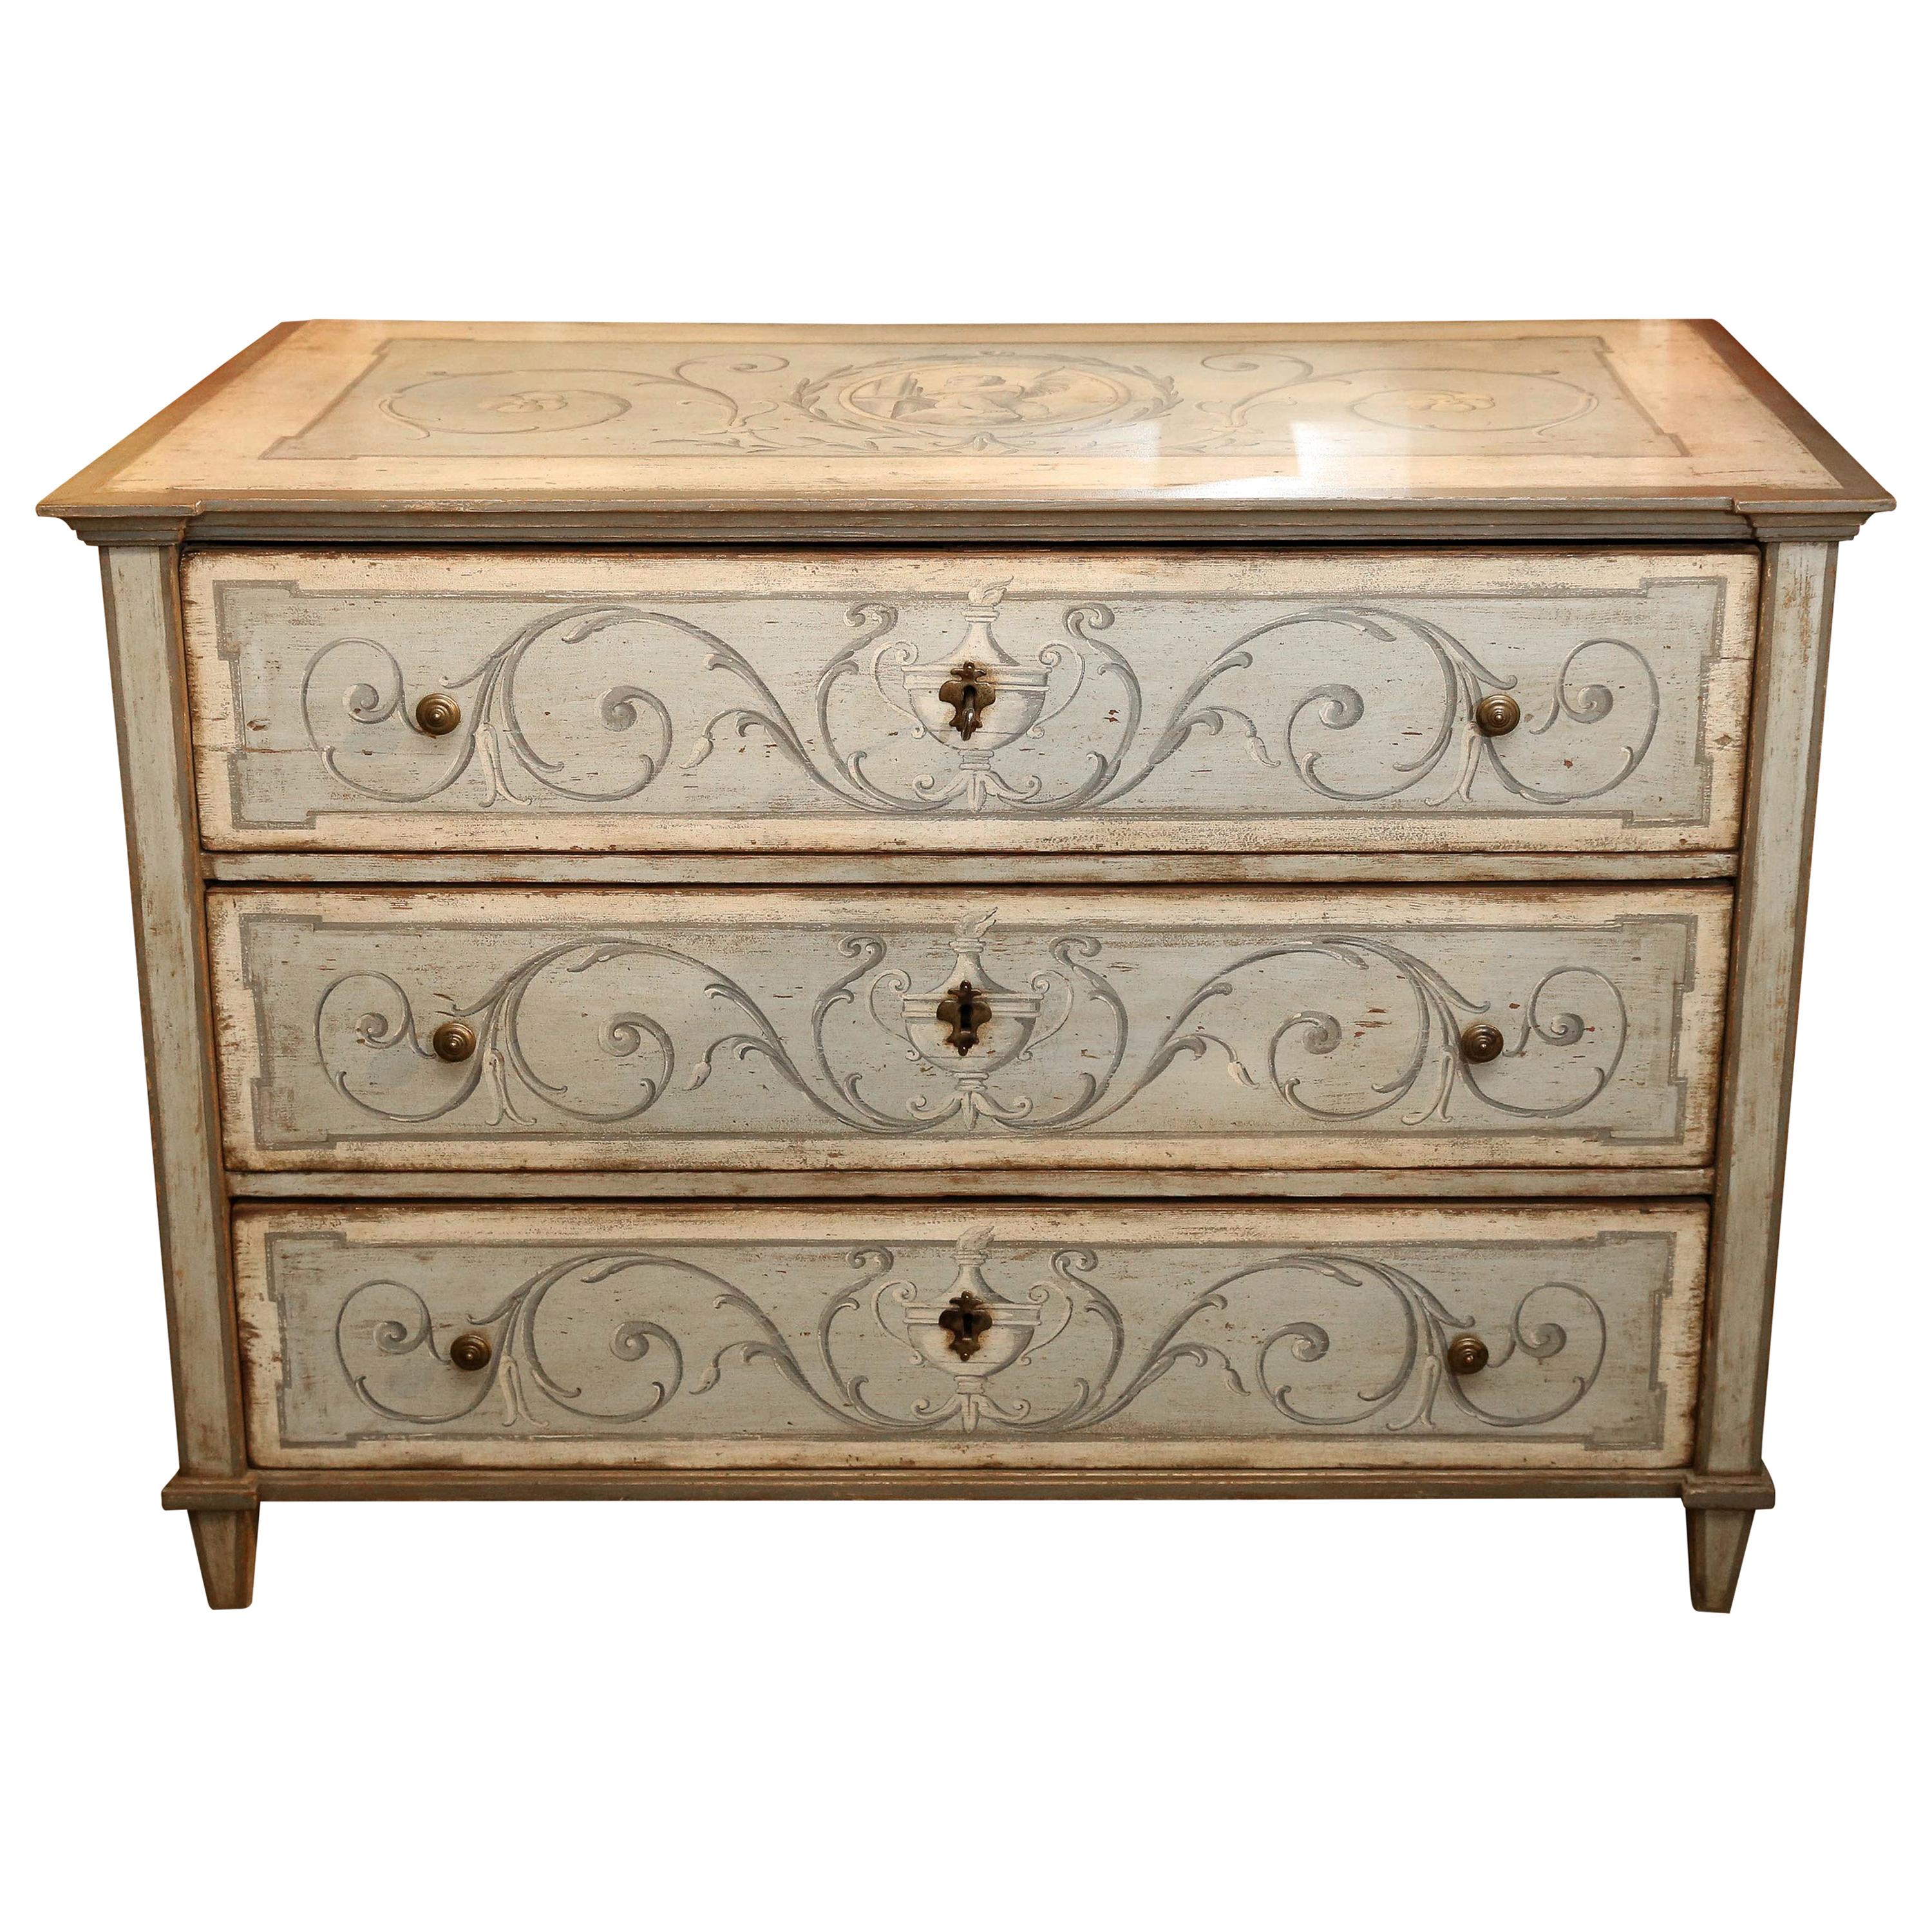 Polychromed Italian Neoclassical-Style Chest, 19th Century